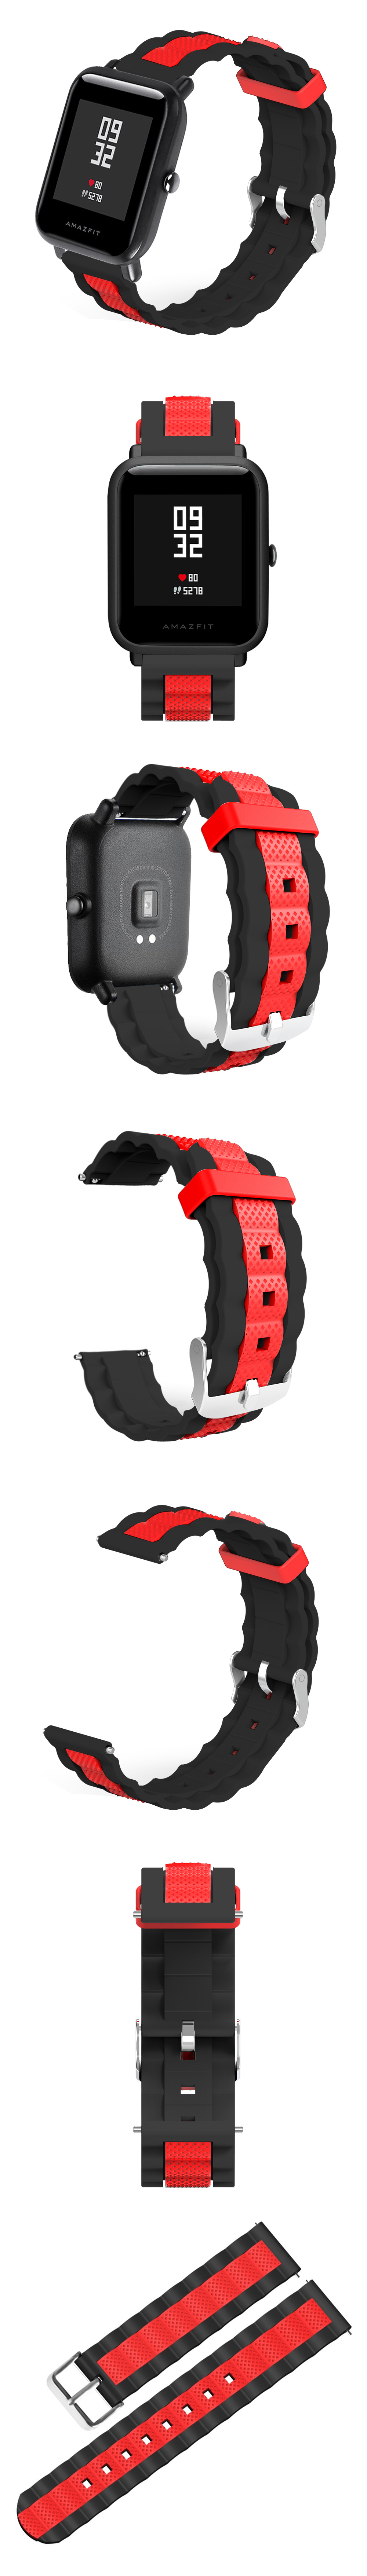 20mm-Three-colour-Waves-Shape-Watch-Band-Strap-Replacement-for-Xiaomi-AMAZFIT-Bip-Pace-Youth-1491091